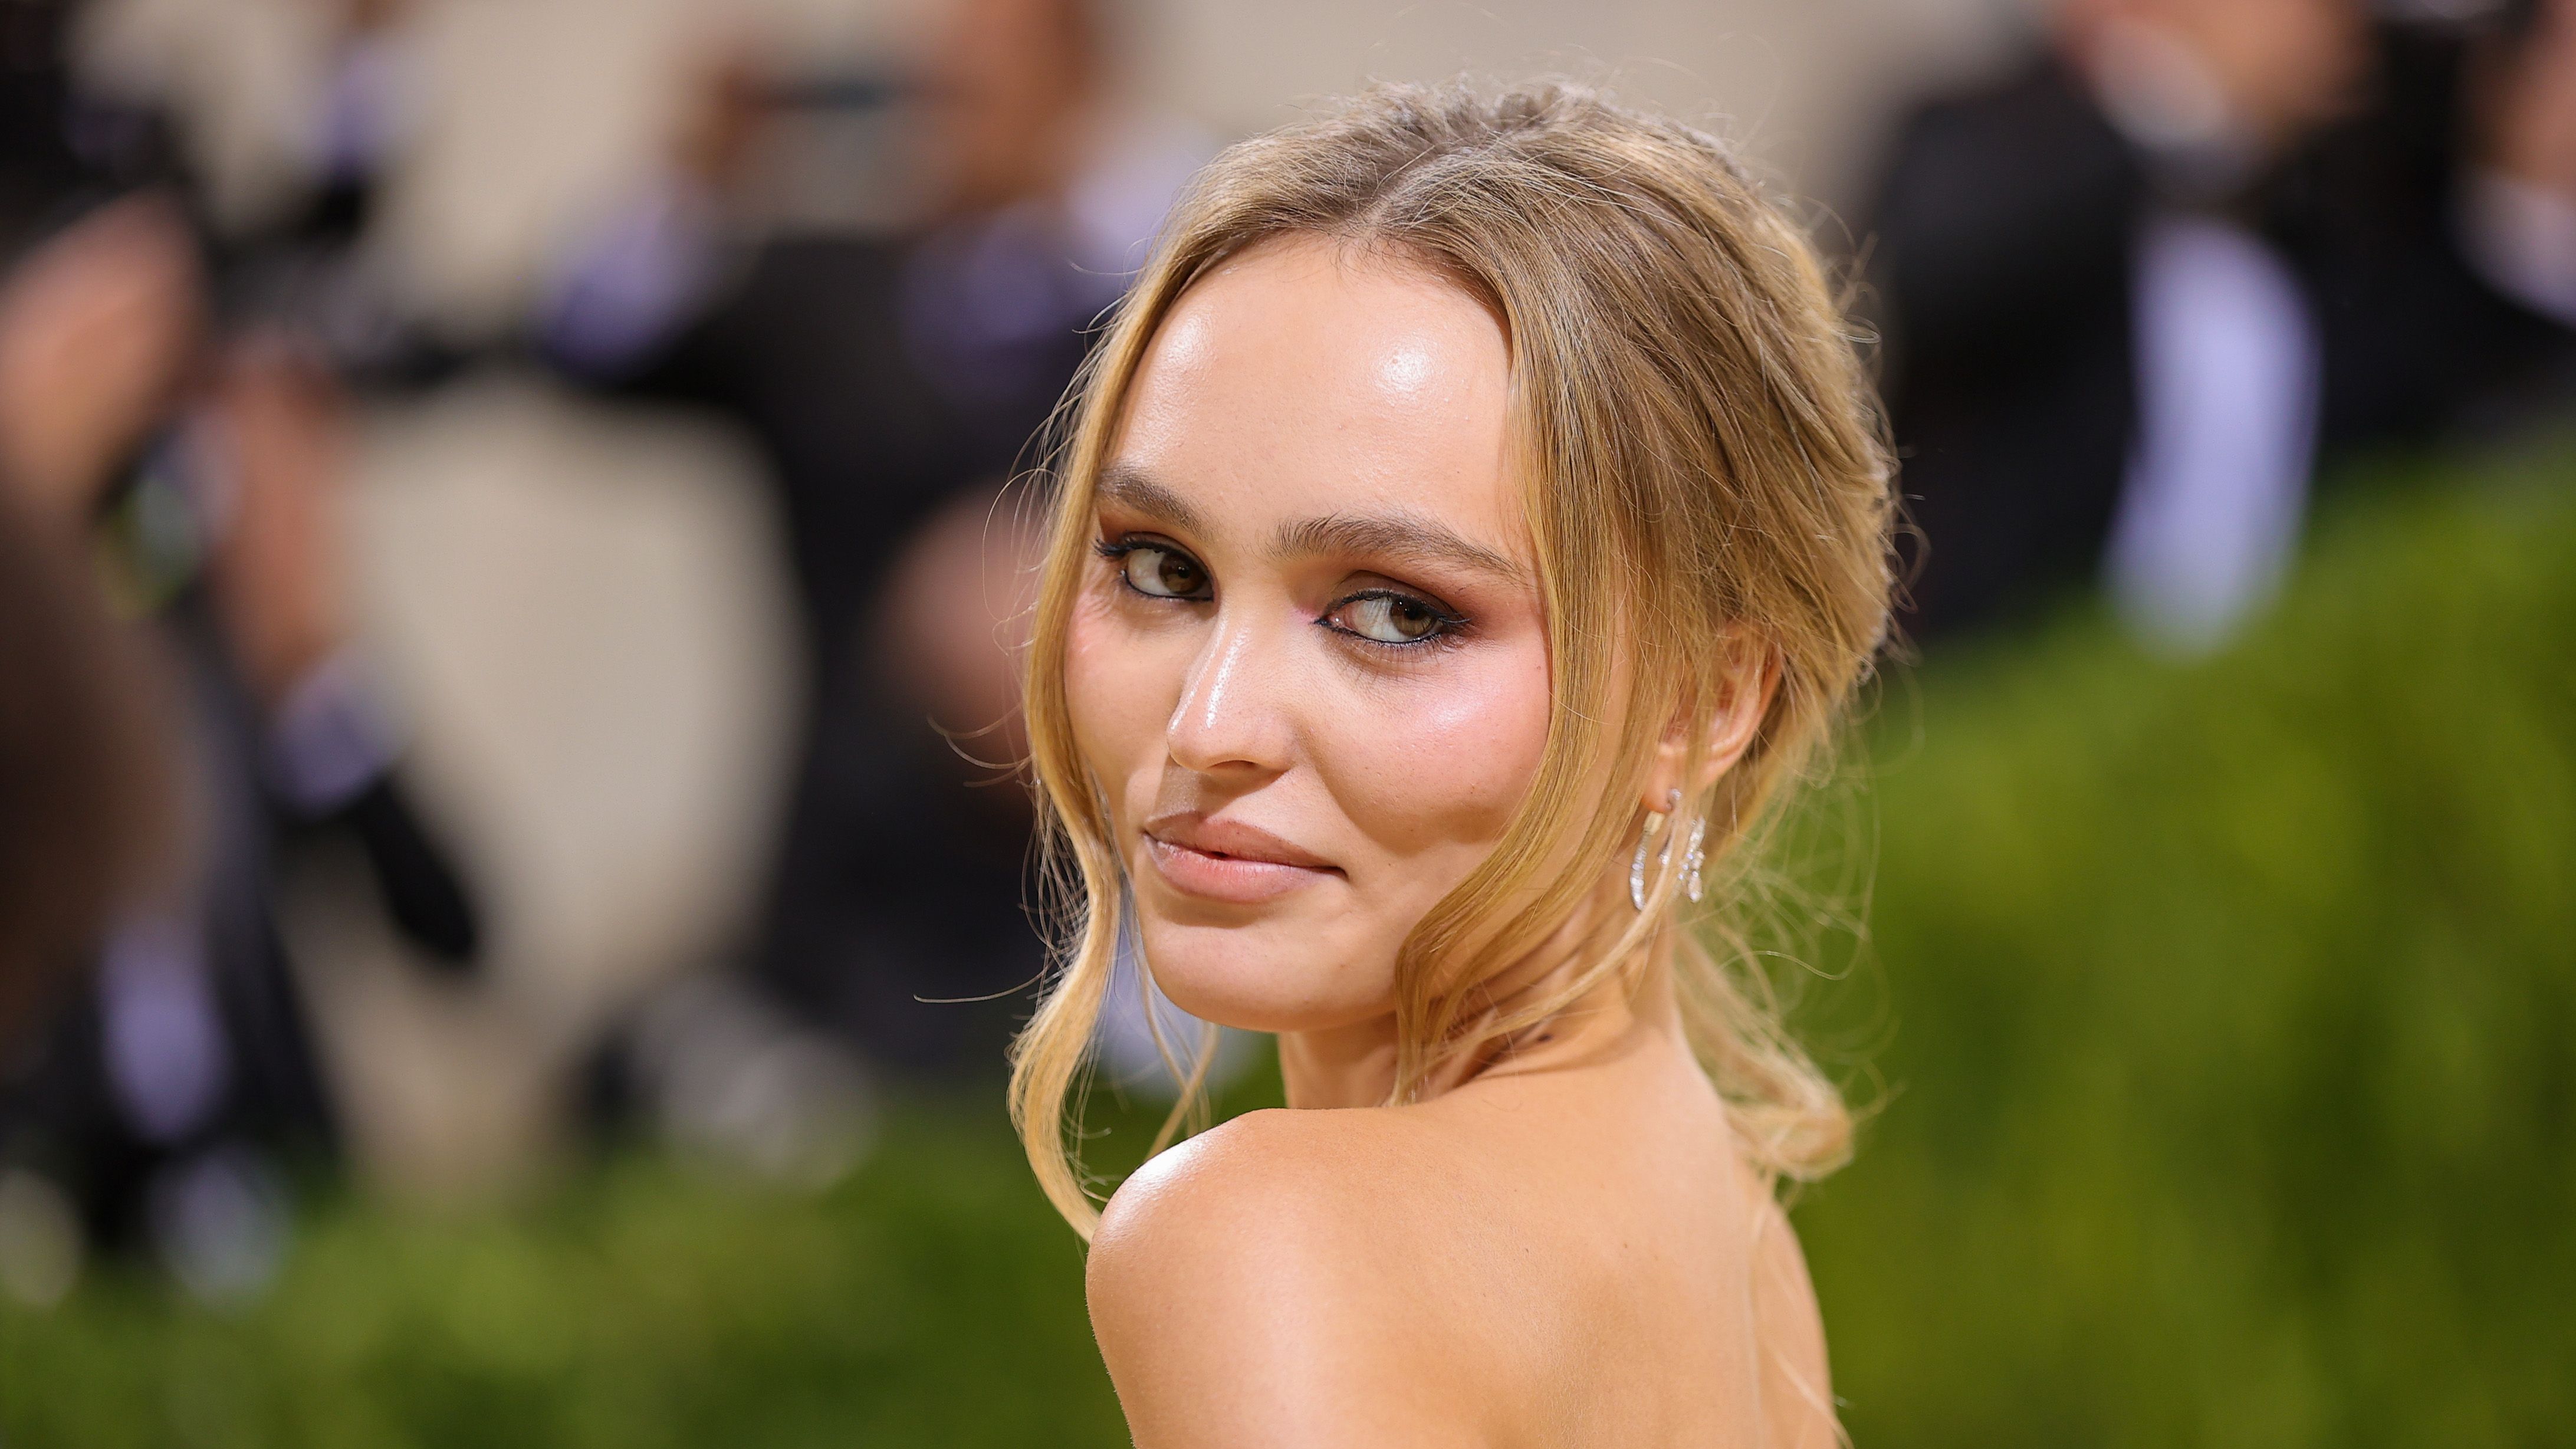 Lily-Rose Depp Is Pretty in Pink Chanel at Venice Film Festival